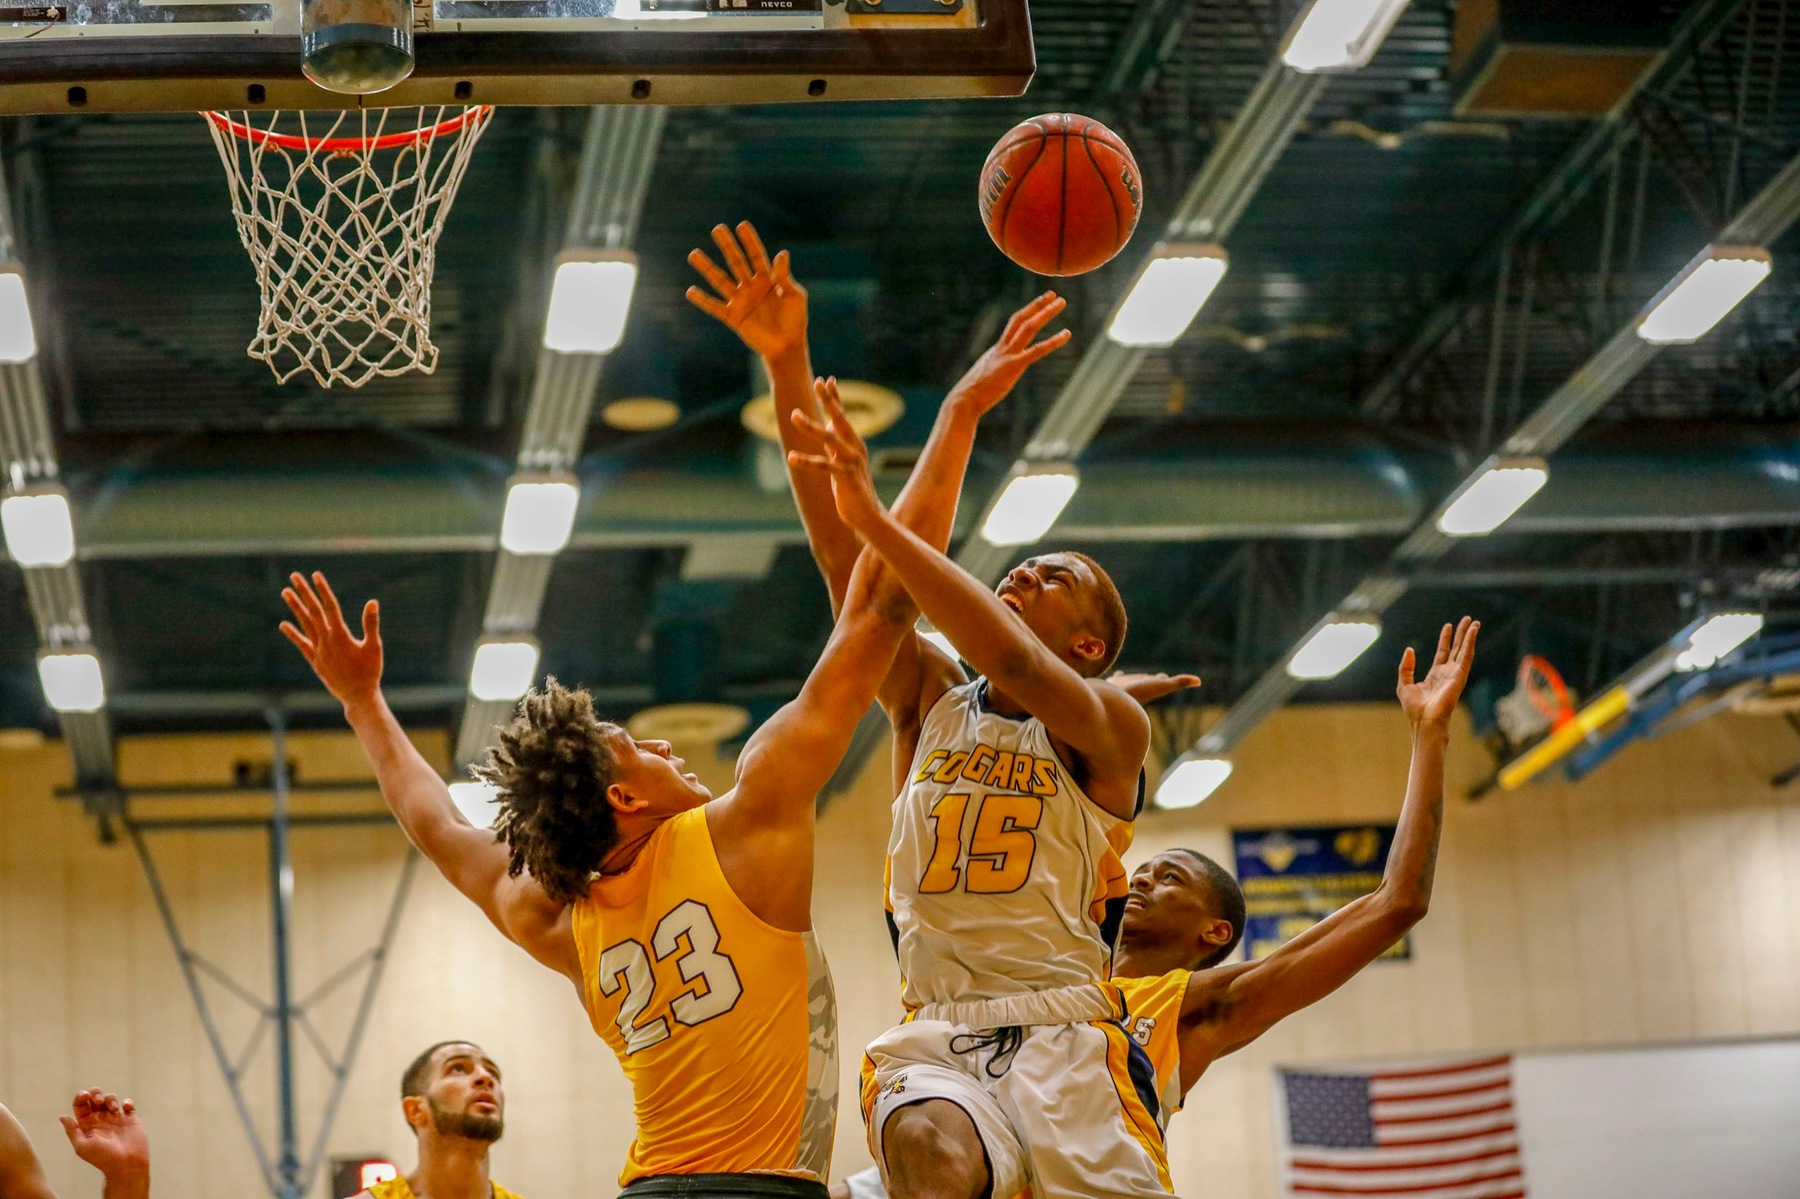 College of the Canyons vs. L.A. Trade Tech College in championship game of 29th Annual Cougar Holiday Classic on Dec. 29, 2018.